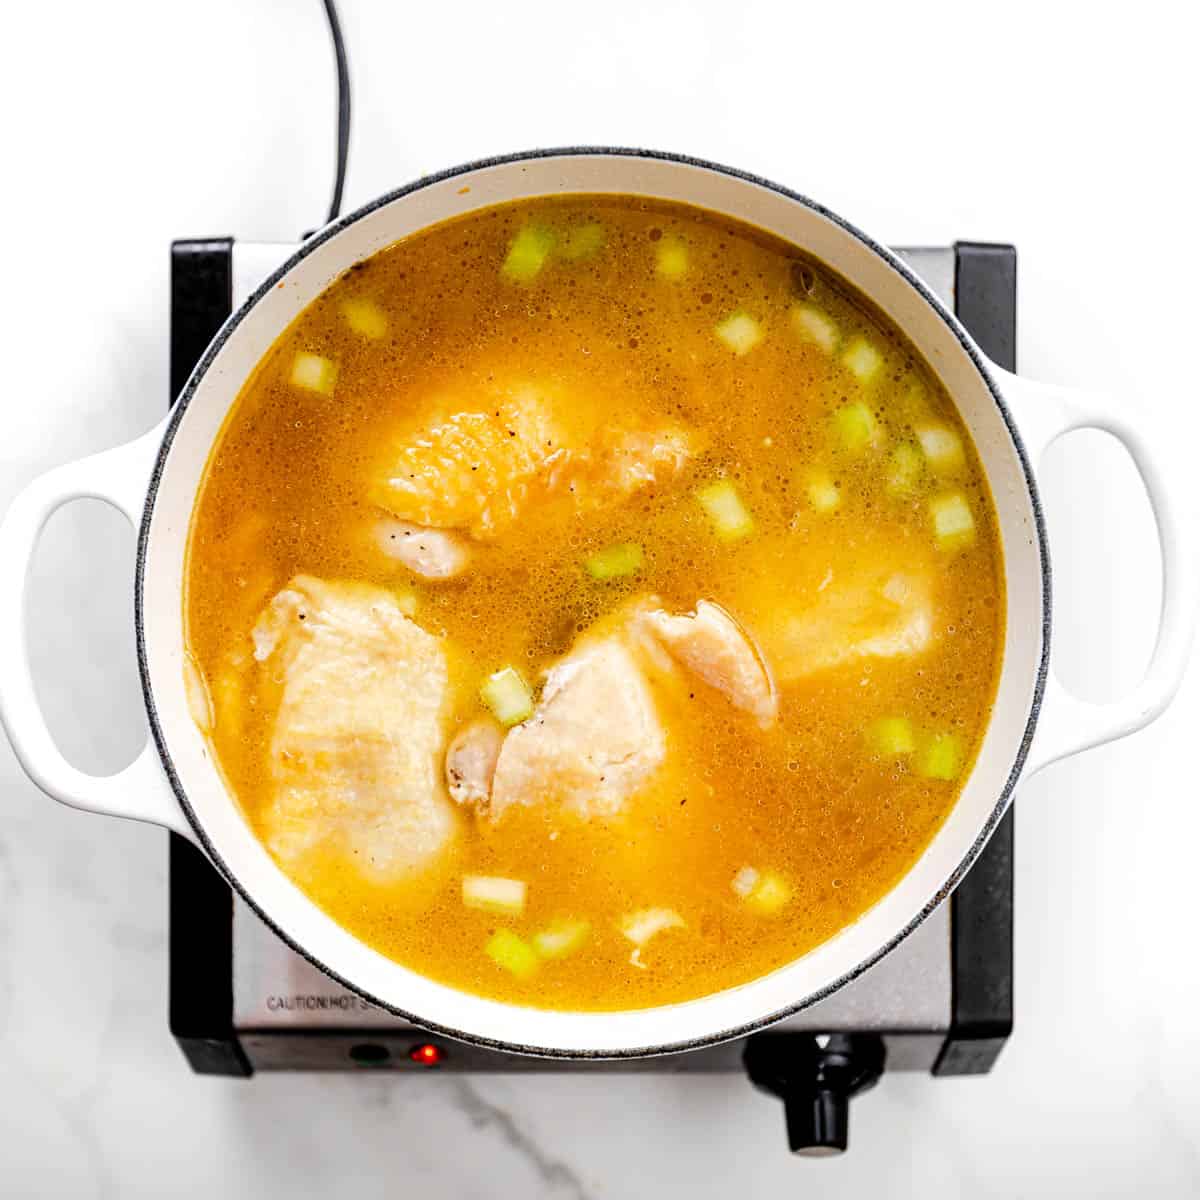 Add a small amount of broth, stirring to loosen browned bits from pan. Add carrots, celery, bay leaf, poultry seasoning, and the remaining broth. Increase the heat and bring the broth to a boil, then lower the heat to medium, simmer, covered, until the chicken is fully cooked for 20-25 minutes.